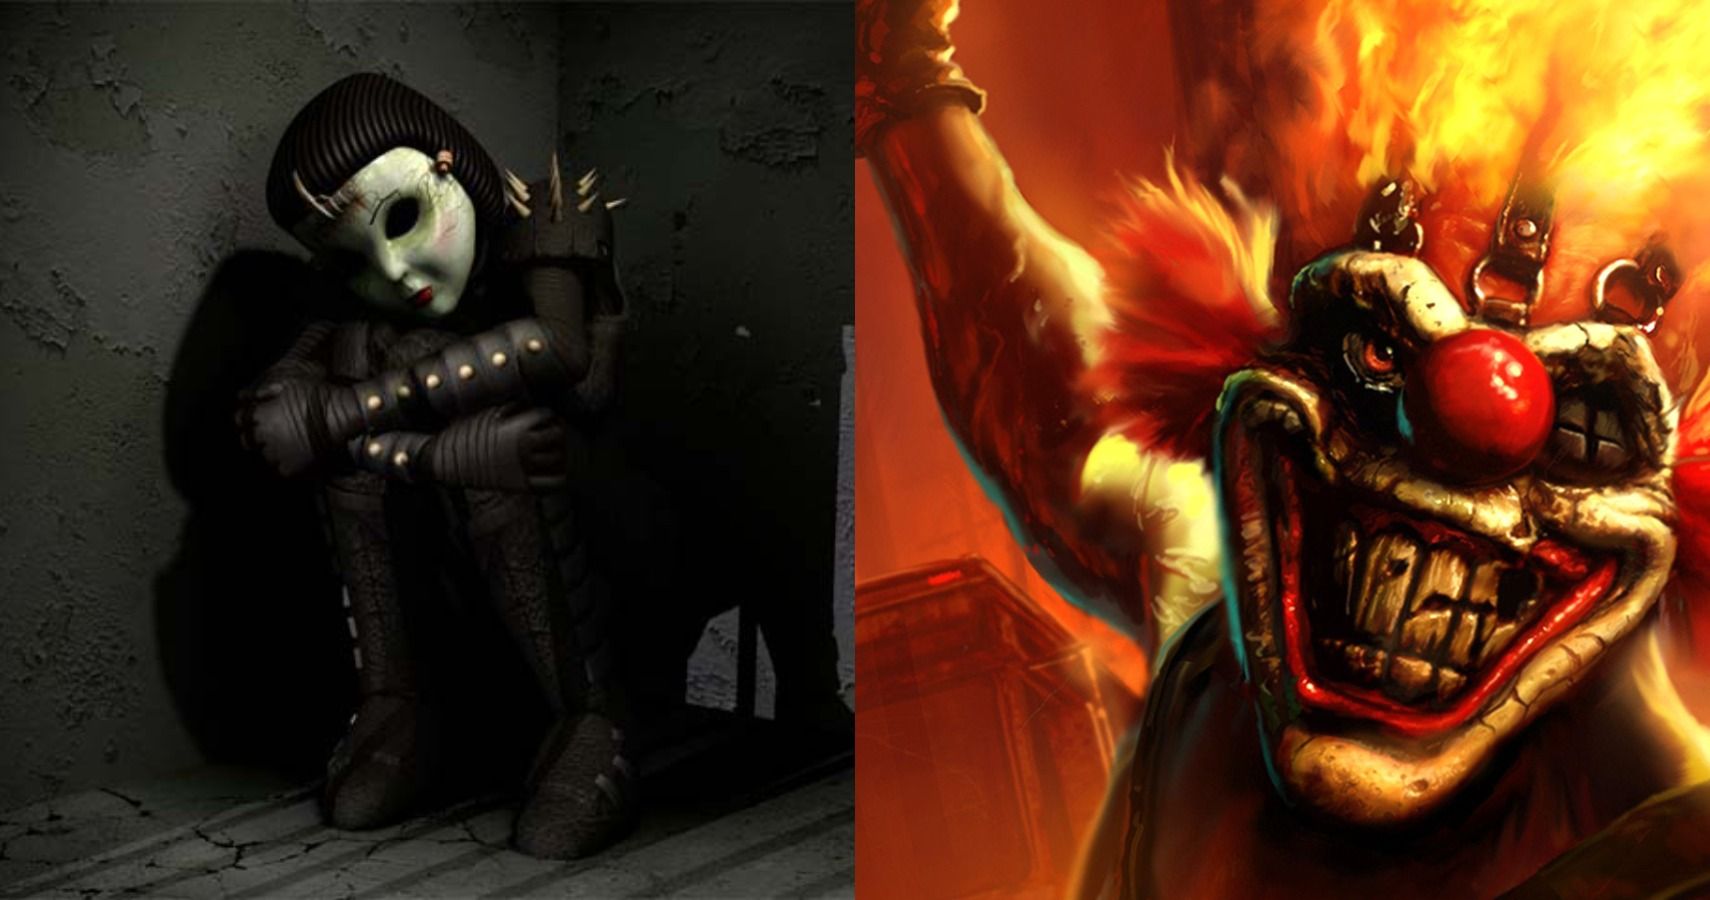 Dollface and the malicious clown Sweet Tooth from Twisted Metal: Black side-by-side.